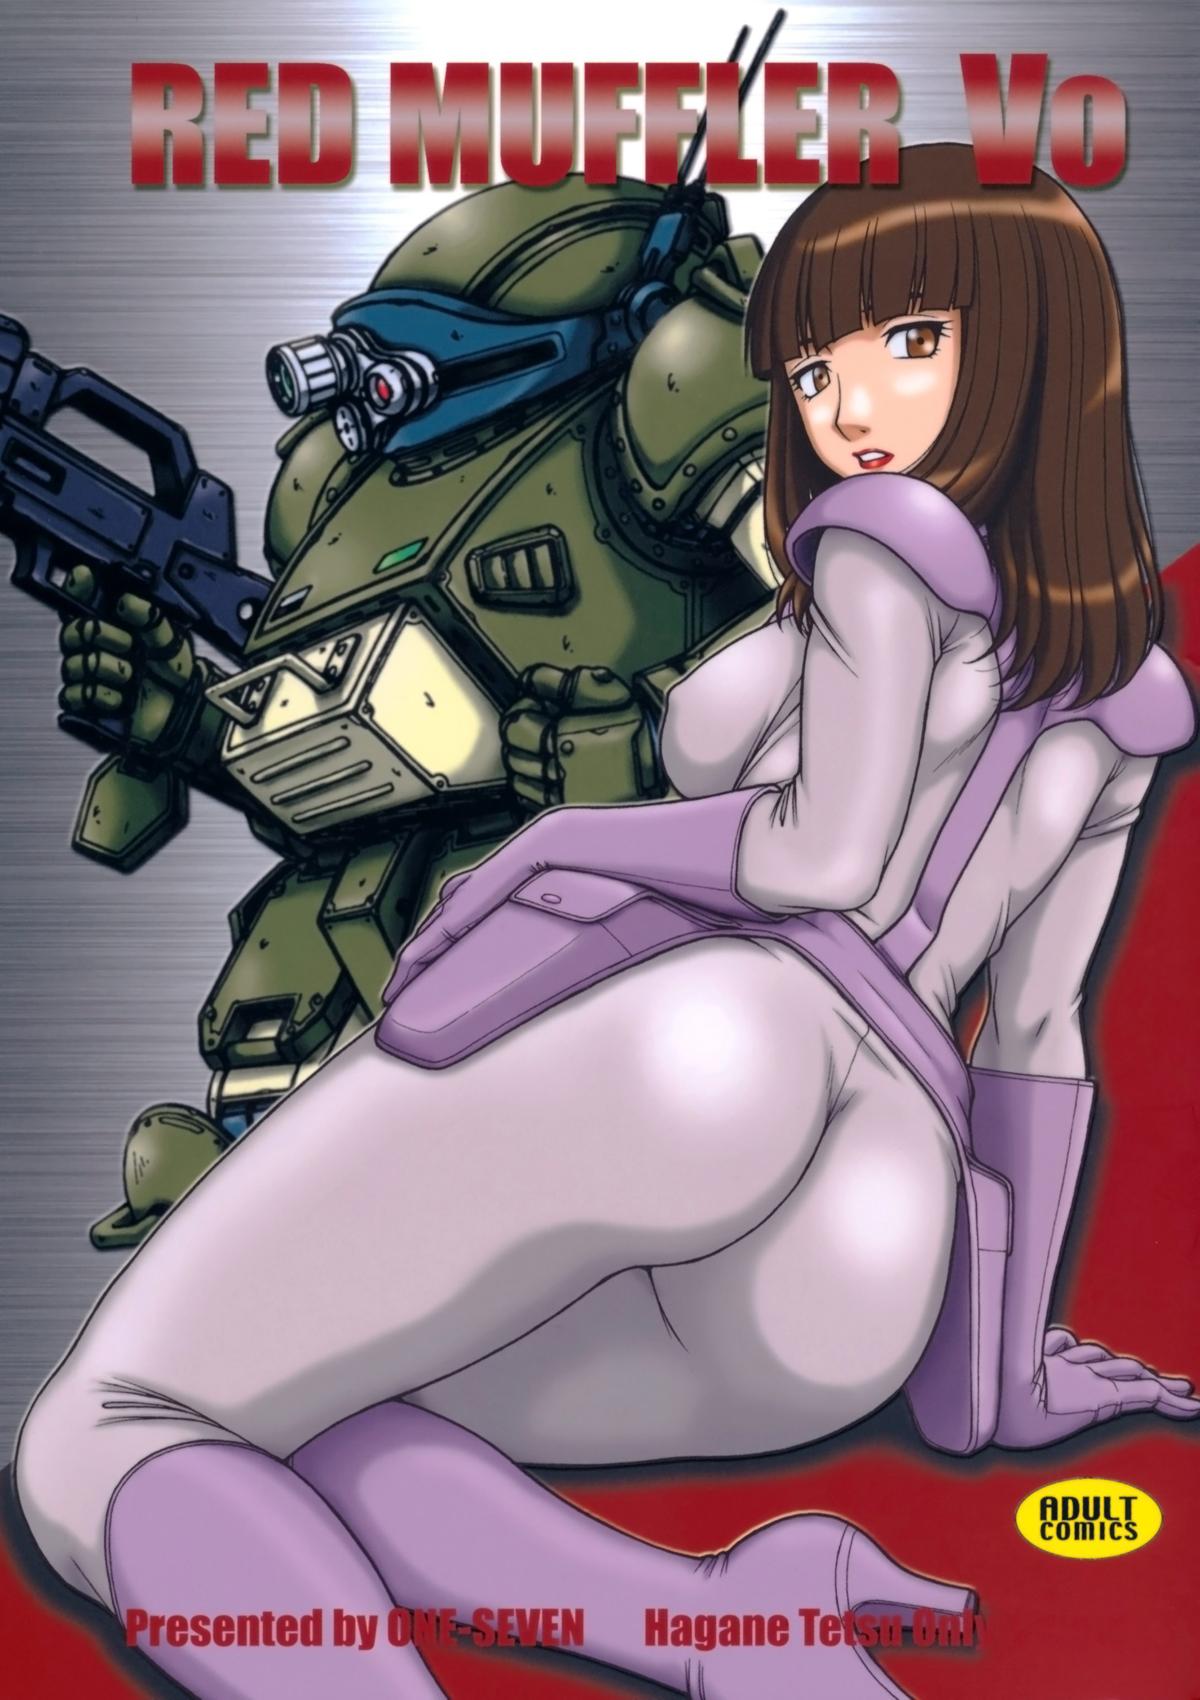 Mediumtits Red Muffler Vo - Armored trooper votoms Free Amature Porn - Page 1